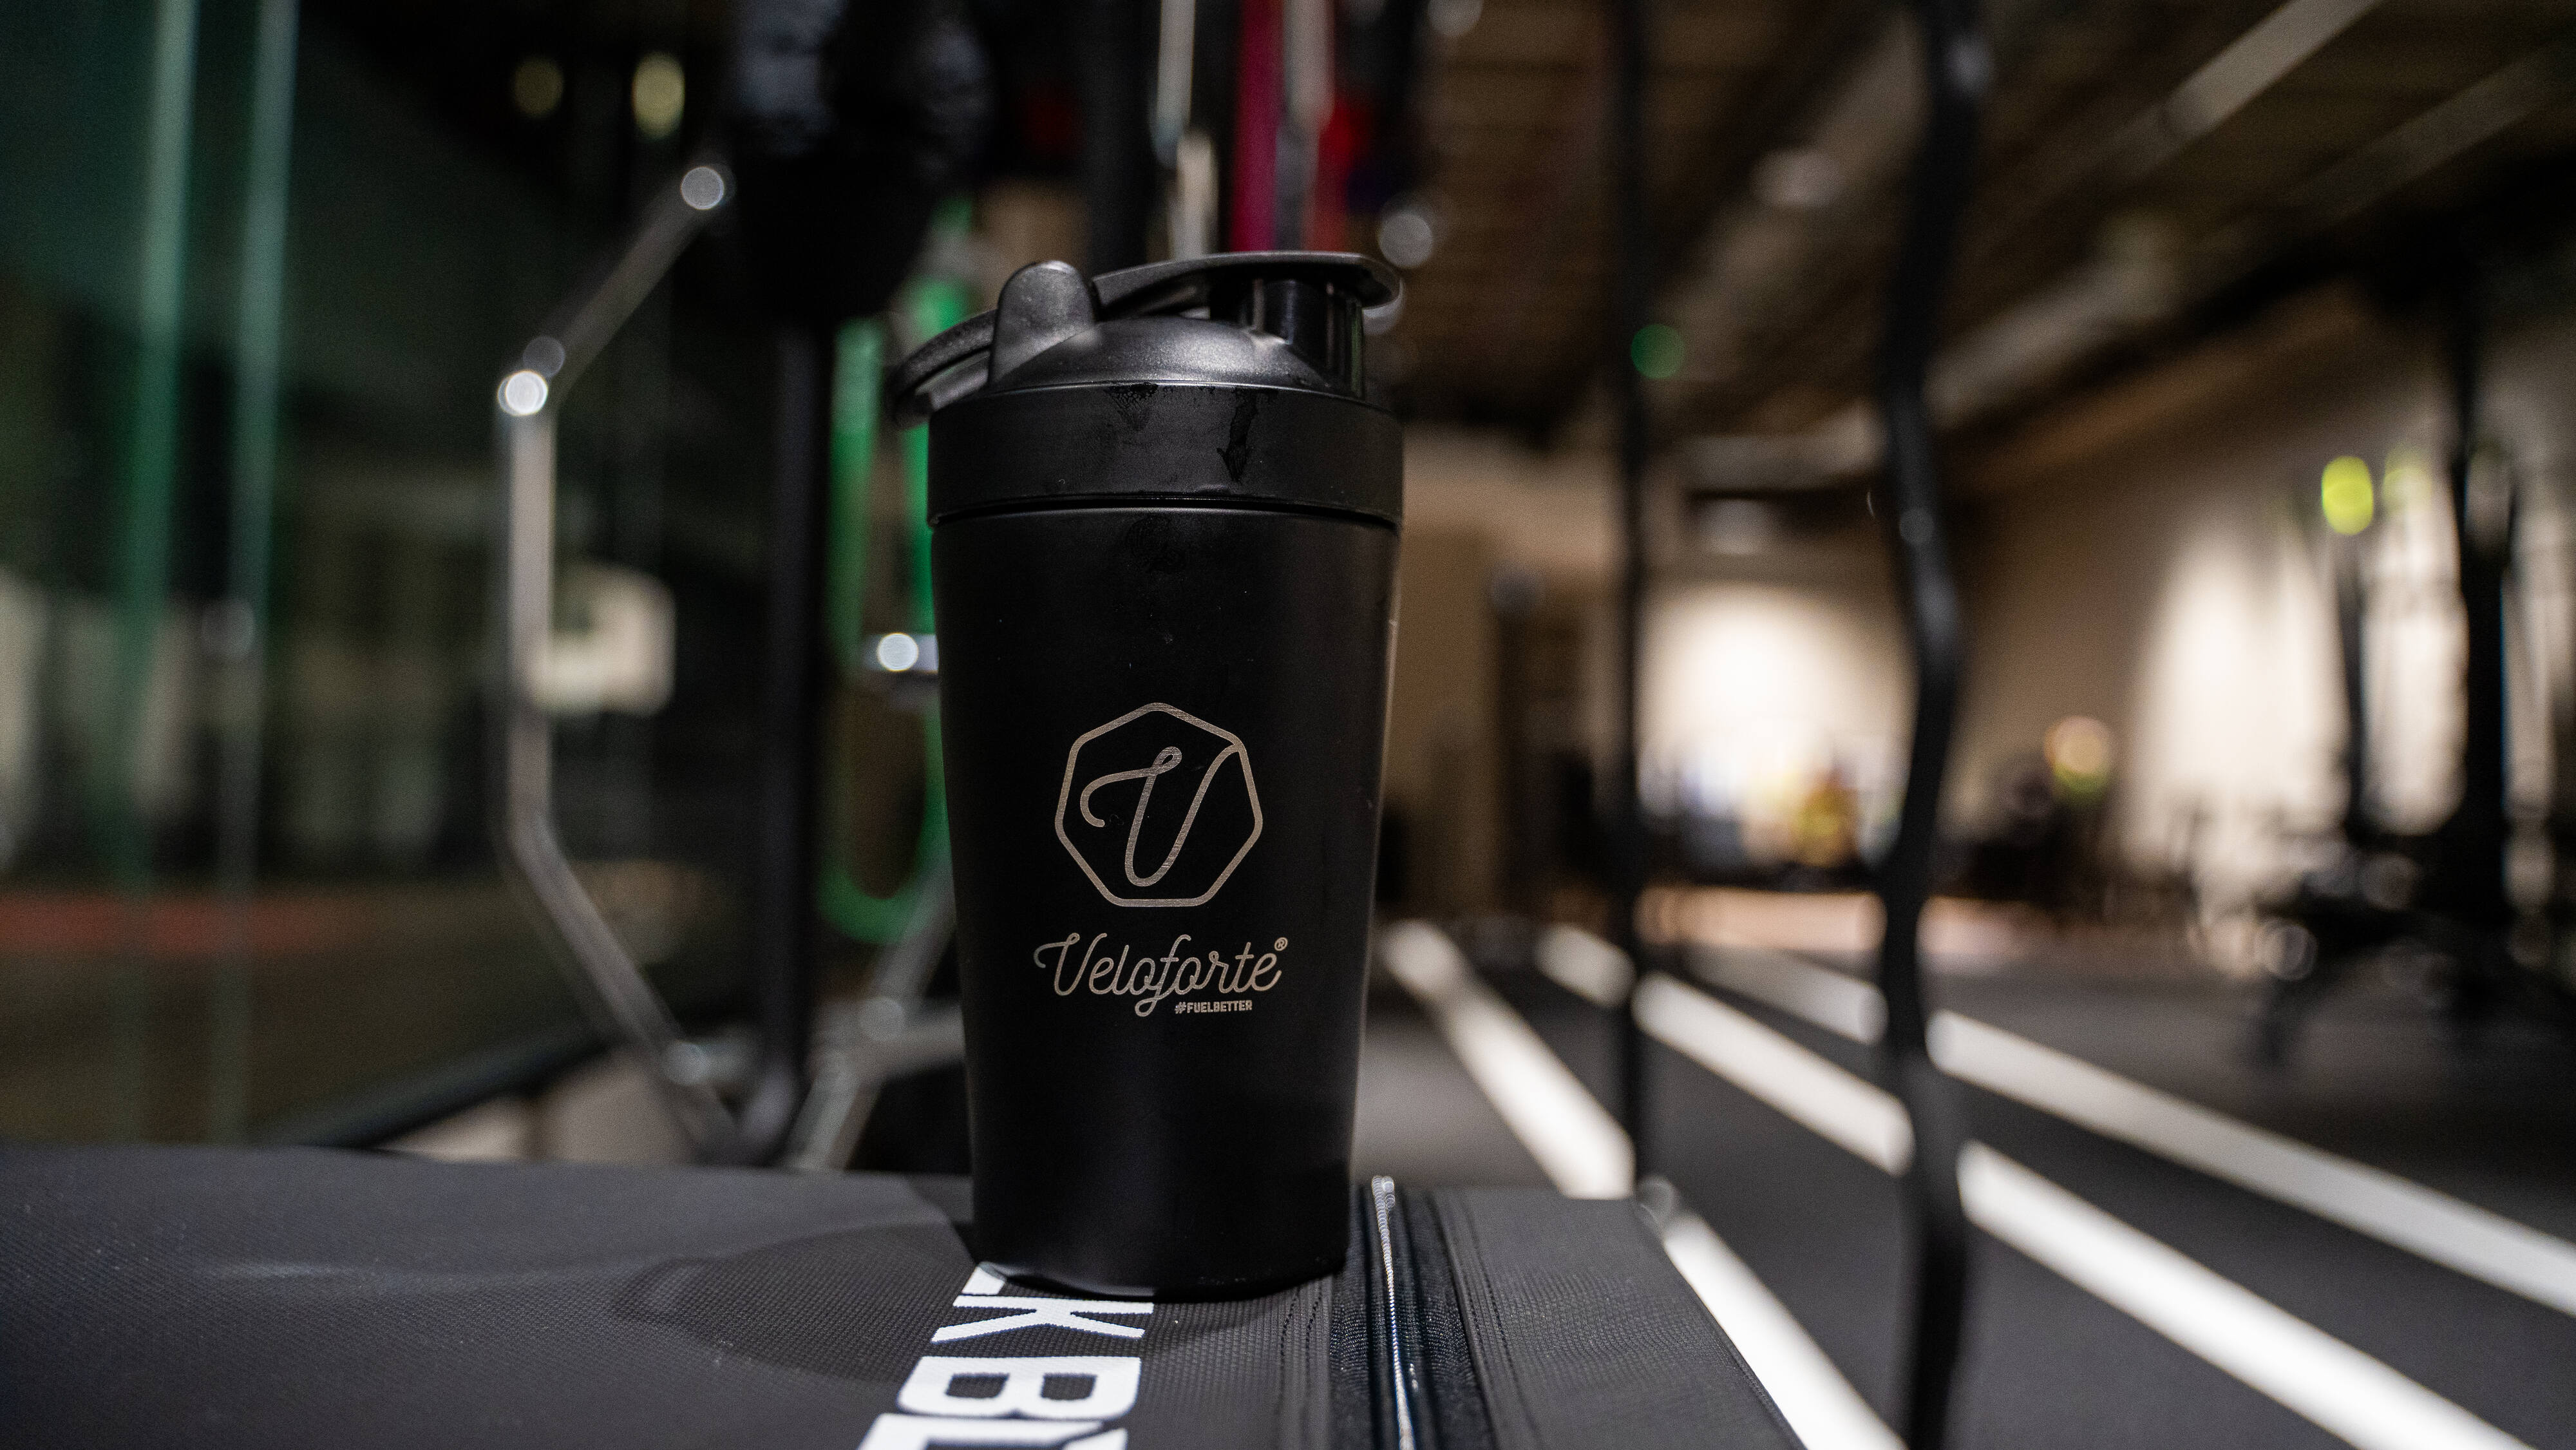 An image of Veloforte's protein shaker in a gym